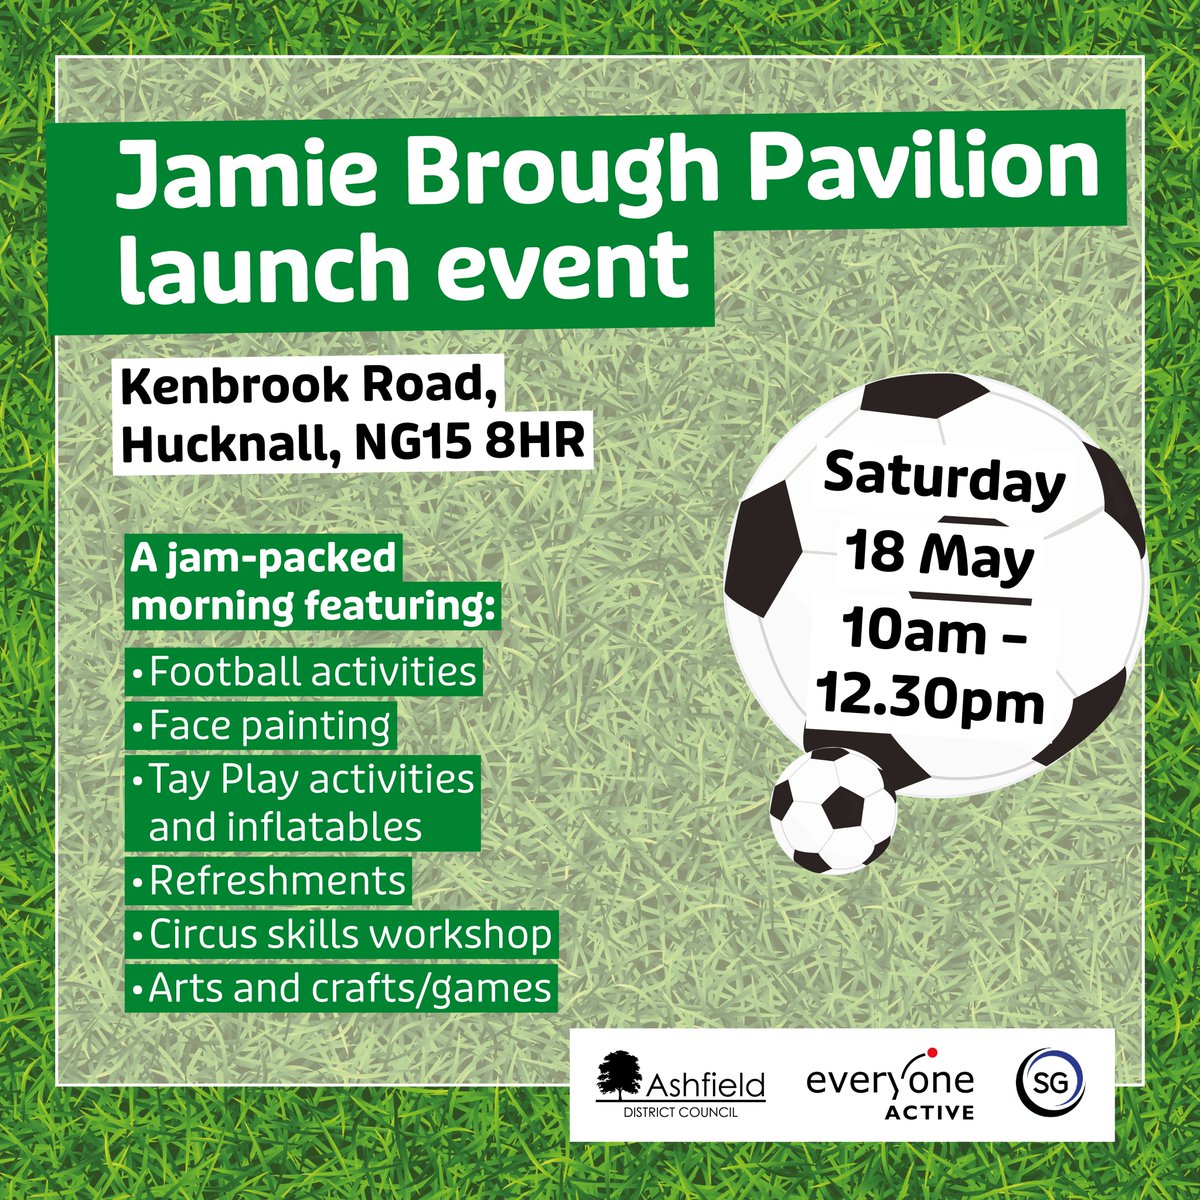 ⚽️ Football lovers - we have a fun event for you! 🌞 To launch Everyone Active's activities at the Jamie Brough Pavilion we are hosting a small free family fun morning on Saturday 18 May from 10am - 12.30pm You can expect: ⚽️ Football activities 🎨 Face painting ♟️ Games